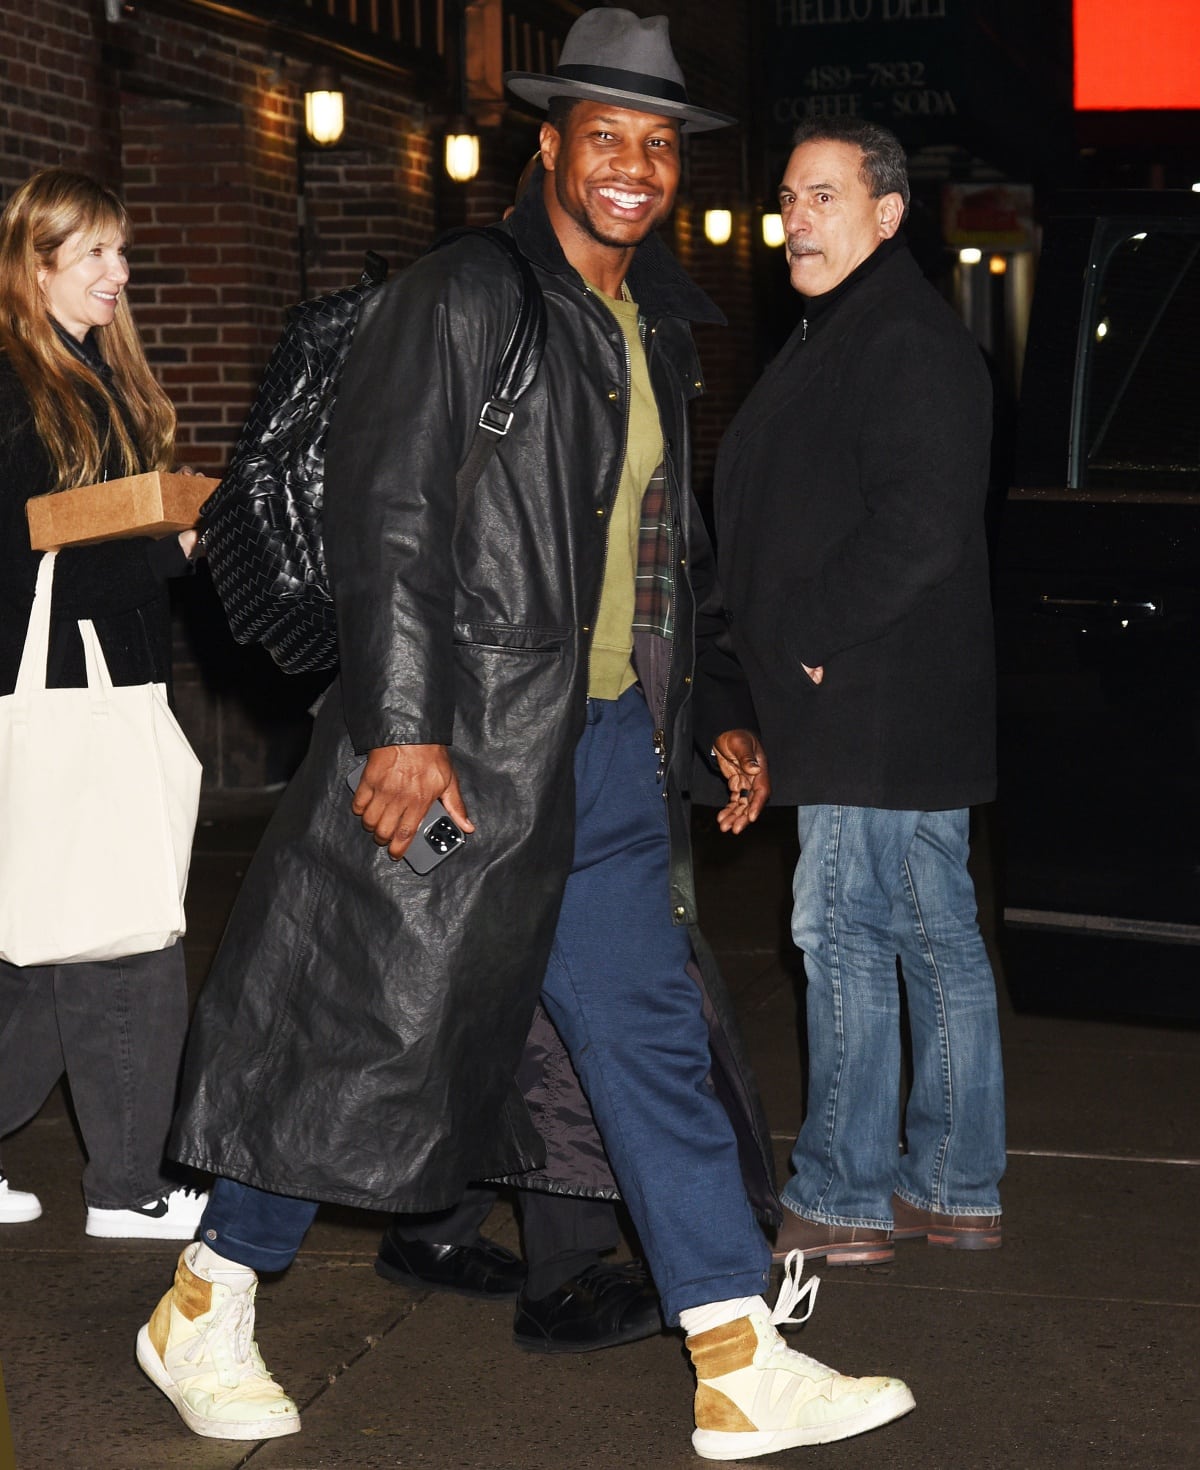 Jonathan Majors at The Late Show with Stephen Colbert studios